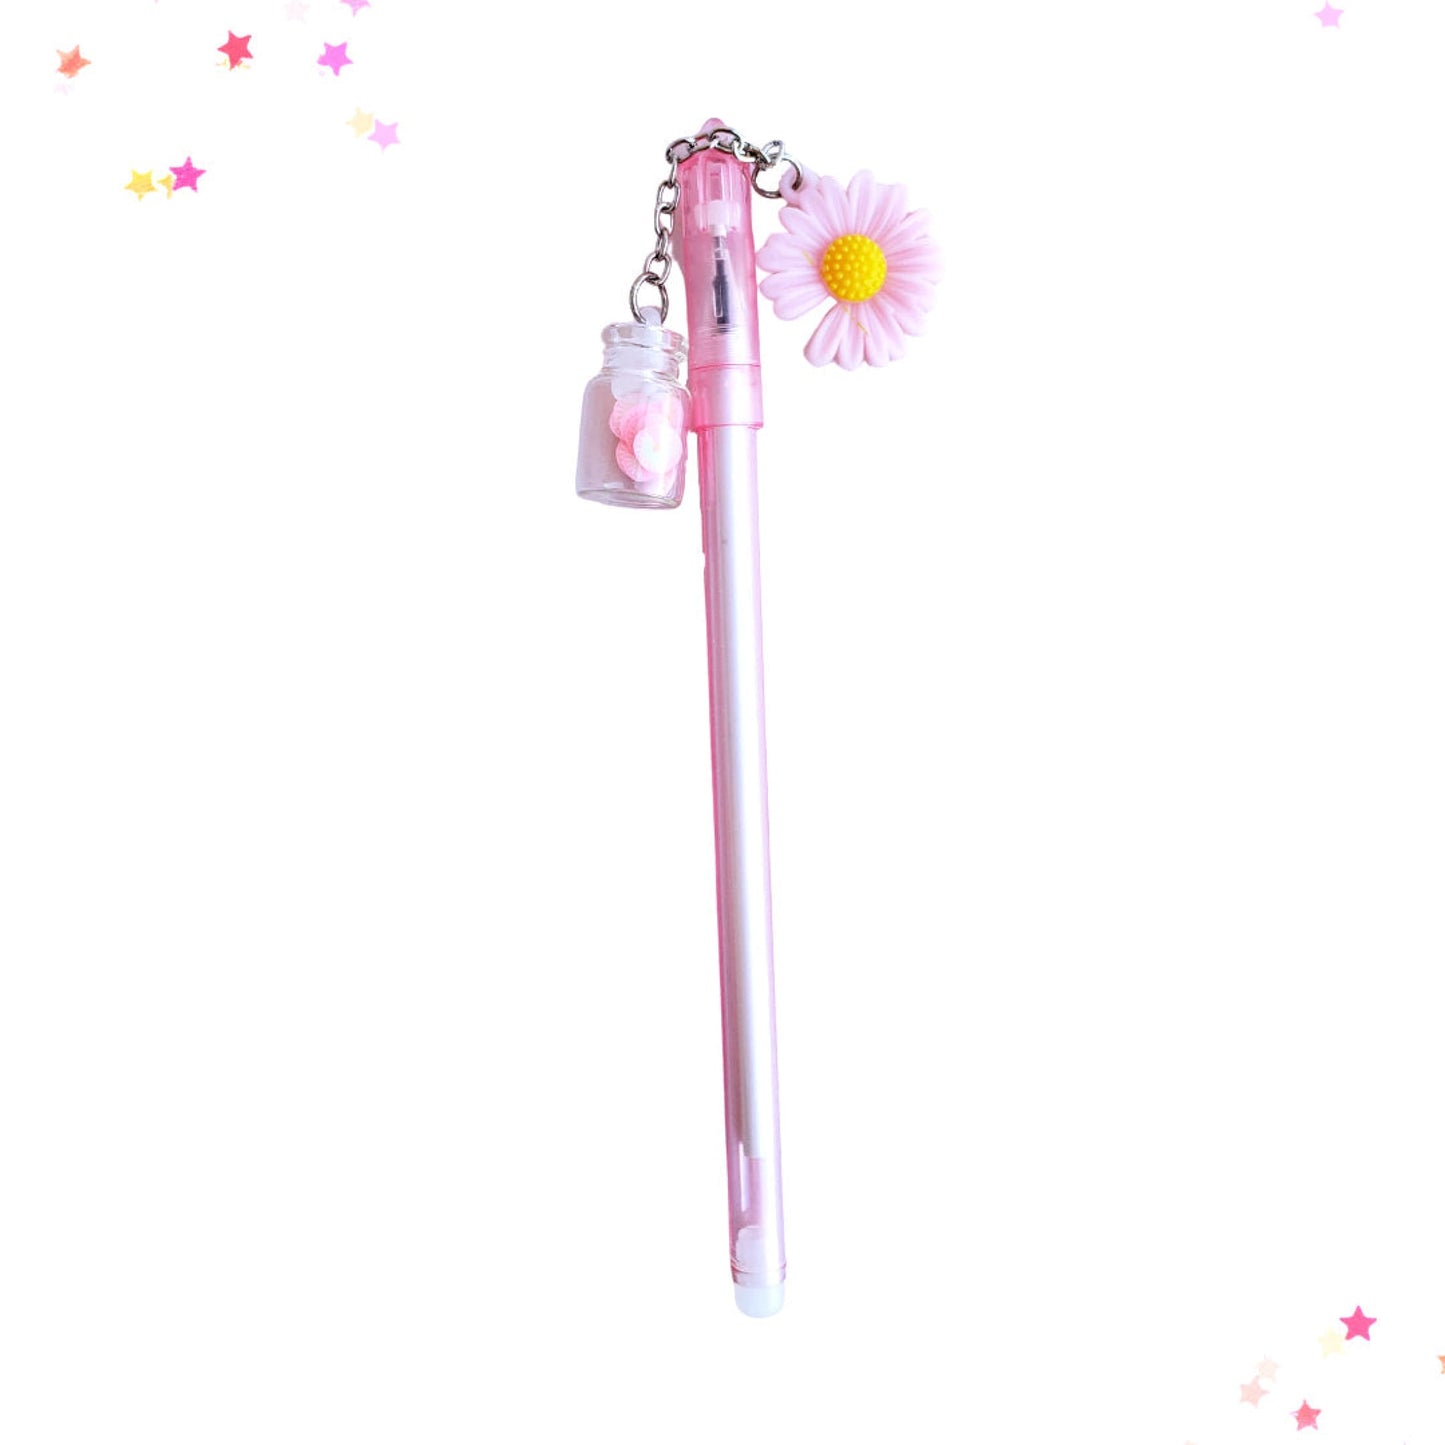 Daisy with Bottle Charm Gel Pen in Pink from Confetti Kitty, Only 2.99